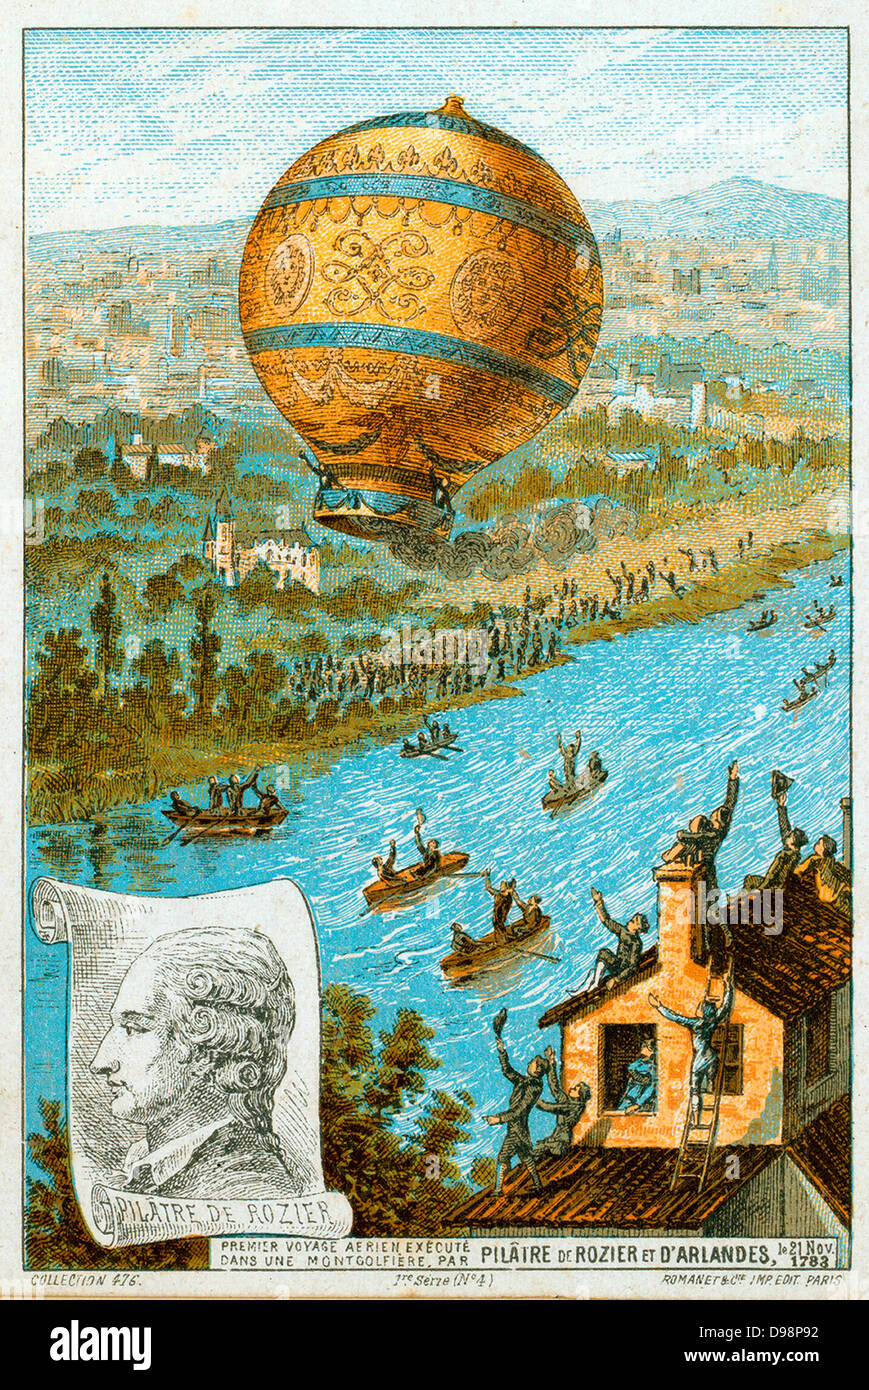 First manned free balloon flight, Pilatre de Rozier and the Marquis d'Arlandes, 21 November 1783, in Montgolfier (hot air) balloon from the Bois de Boulogne, Paris, France, travelling 9km in 25 minutes. Aeronautics Aviation Ballooning Stock Photo